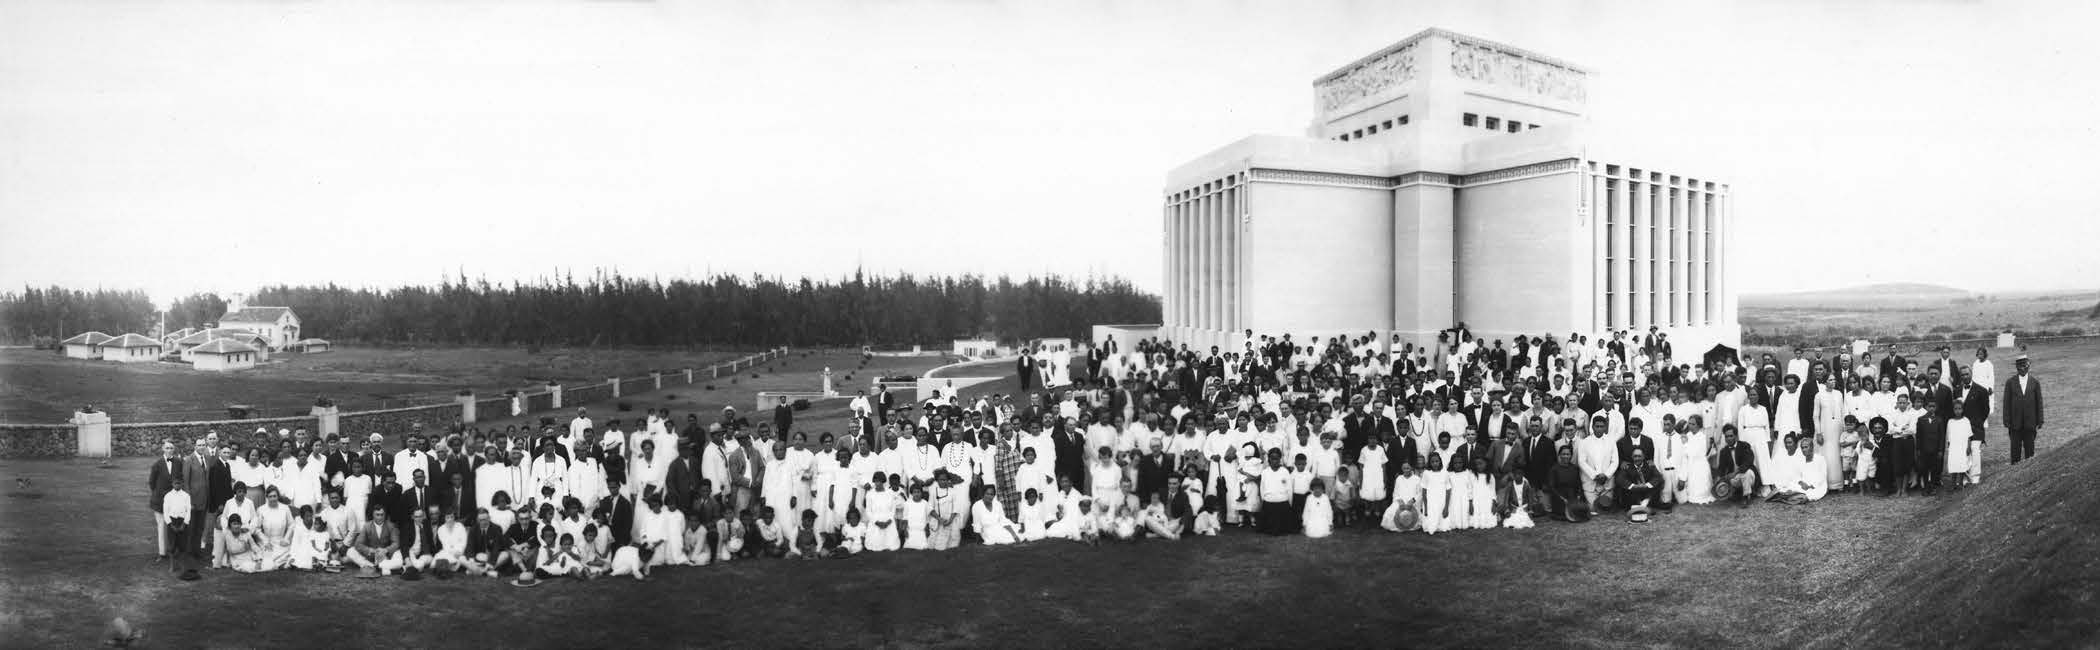 Gathering of Hawaiian Saints at the temple on 11 June 1920. Courtesy of Hawaii State Archives.